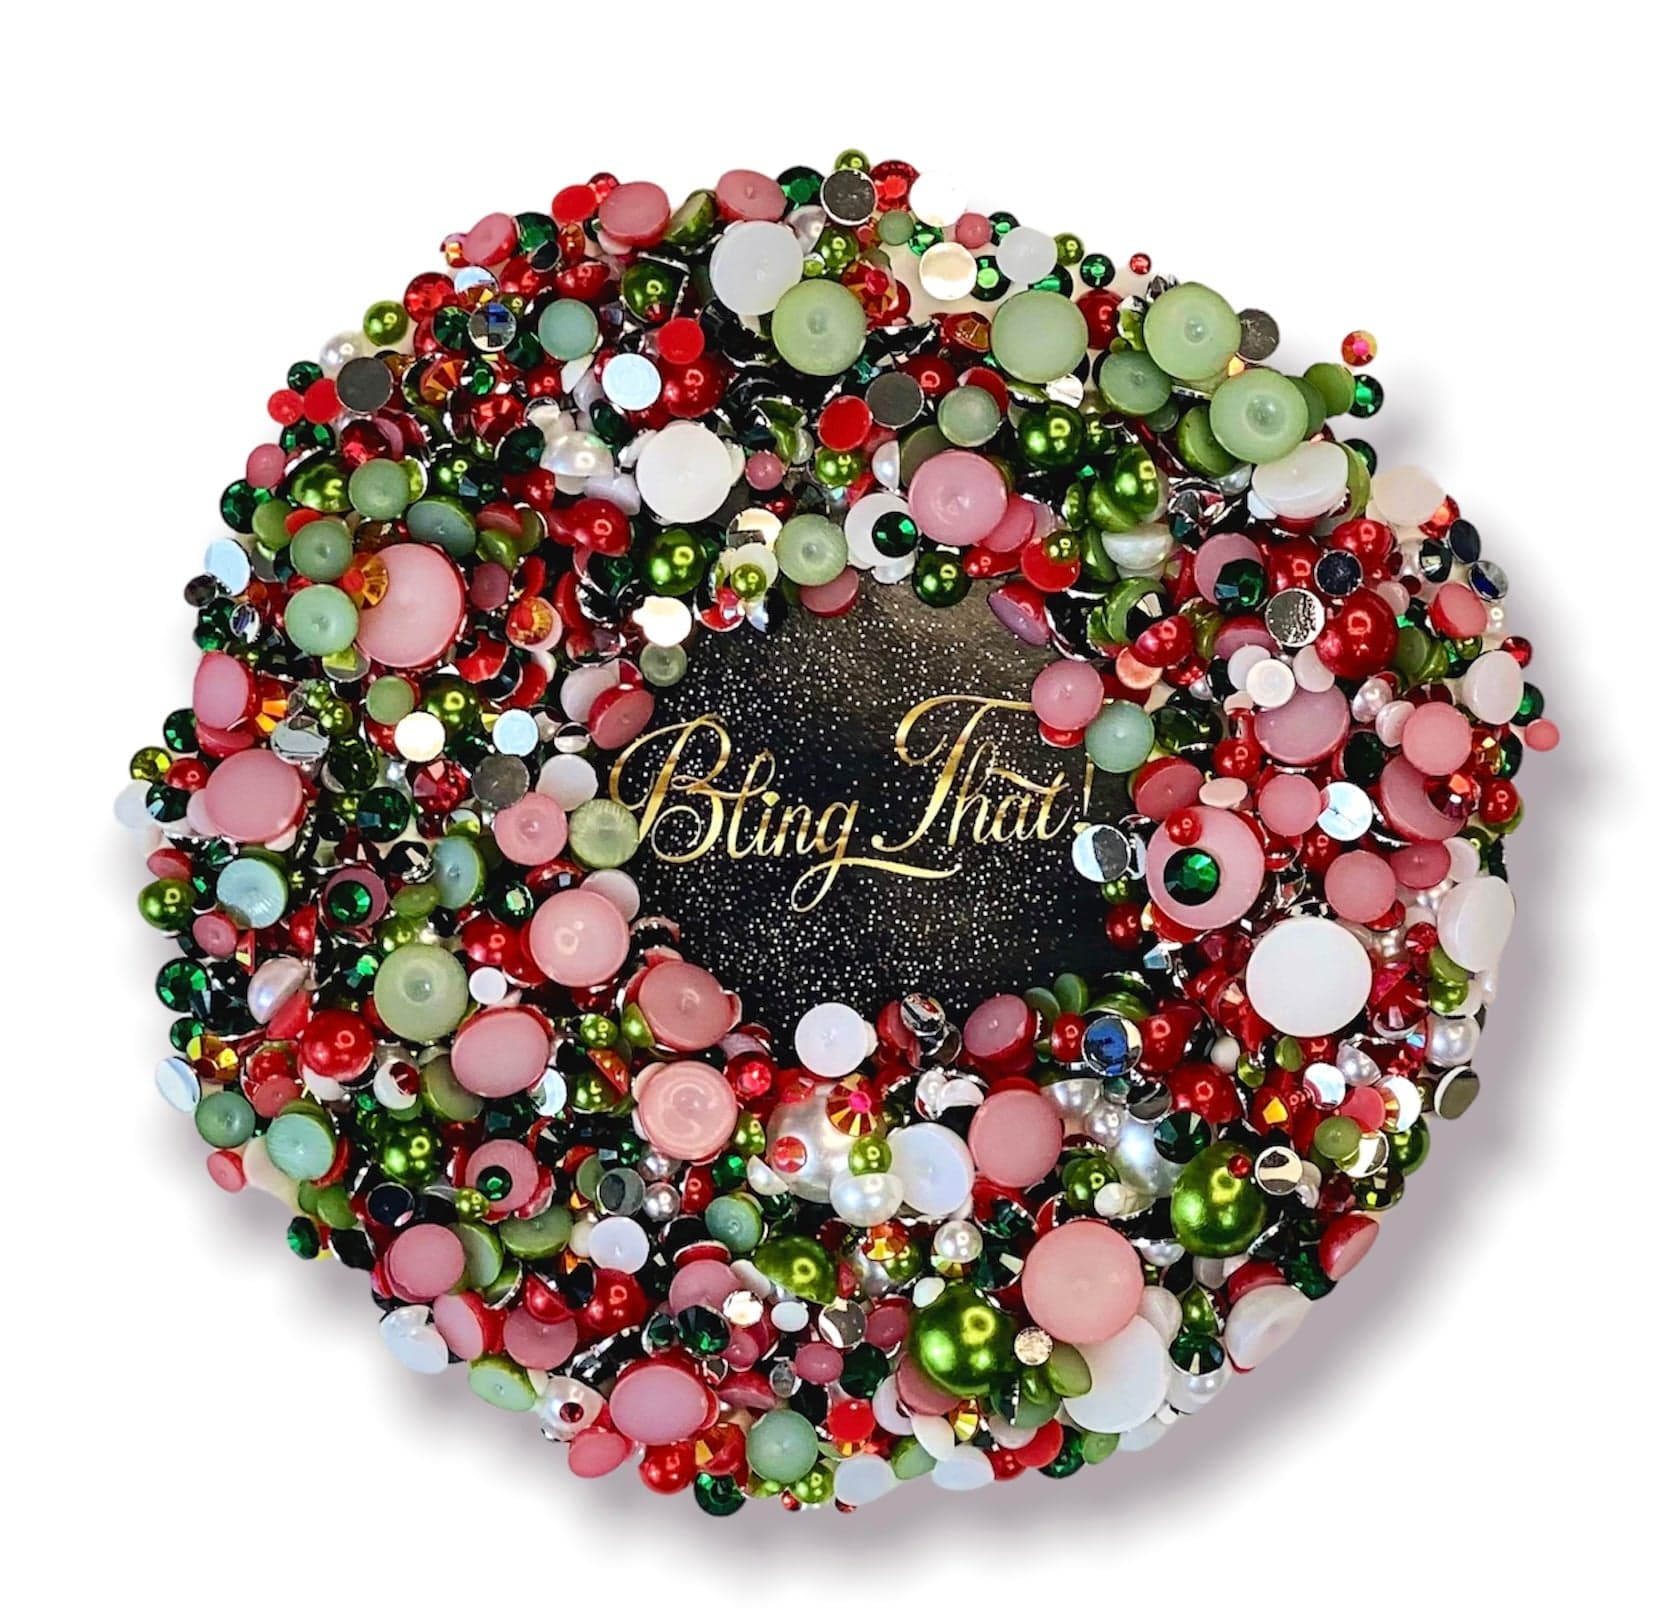 Bling That! Pearl Mix Holly Jolly #6 Pearl Rhinestone Mix